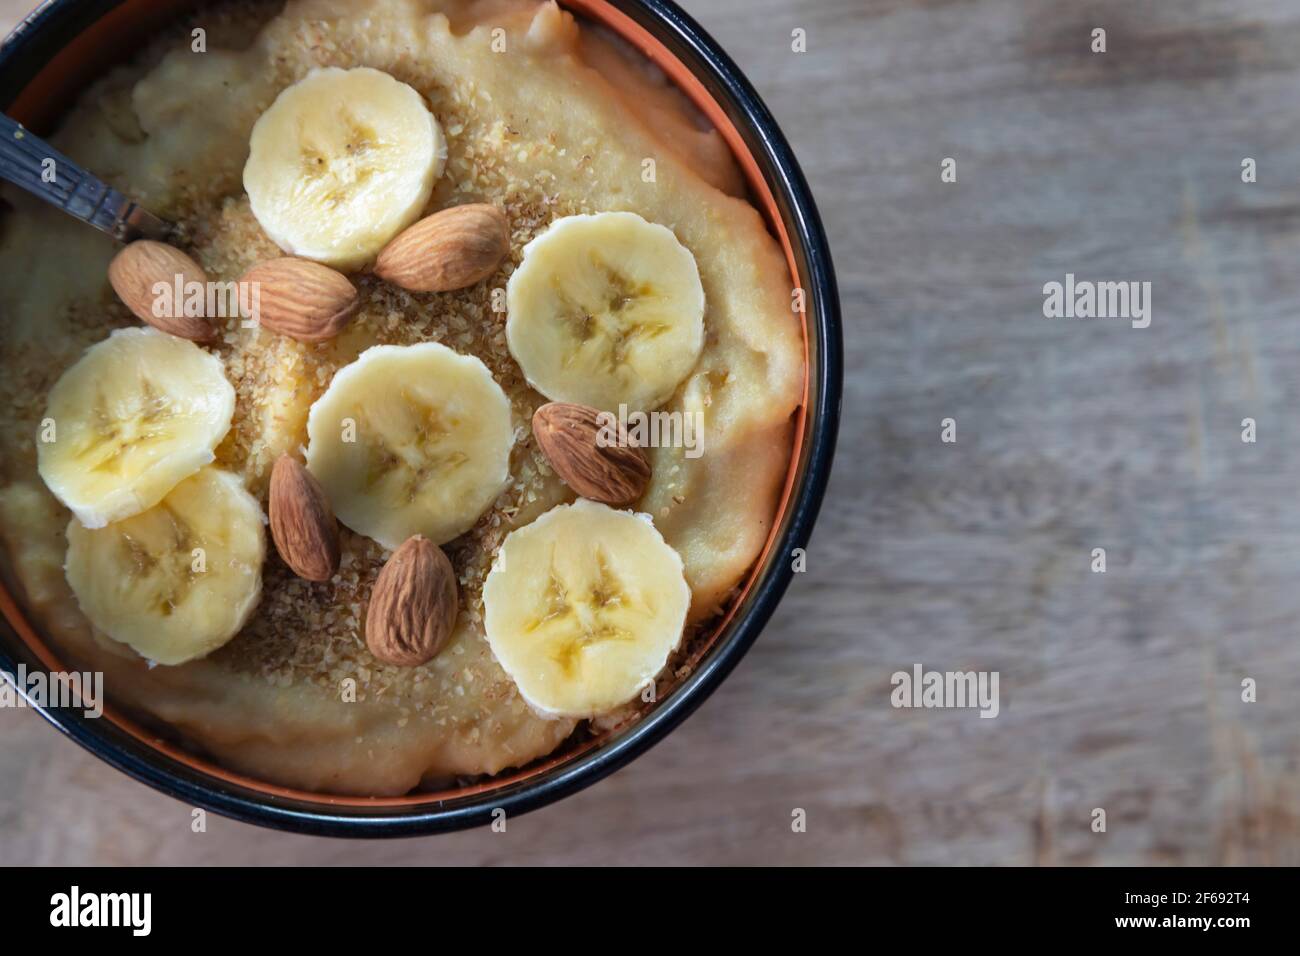 Almonds and banana with in a bowl of cornmeal porridge on a wooden surface Stock Photo